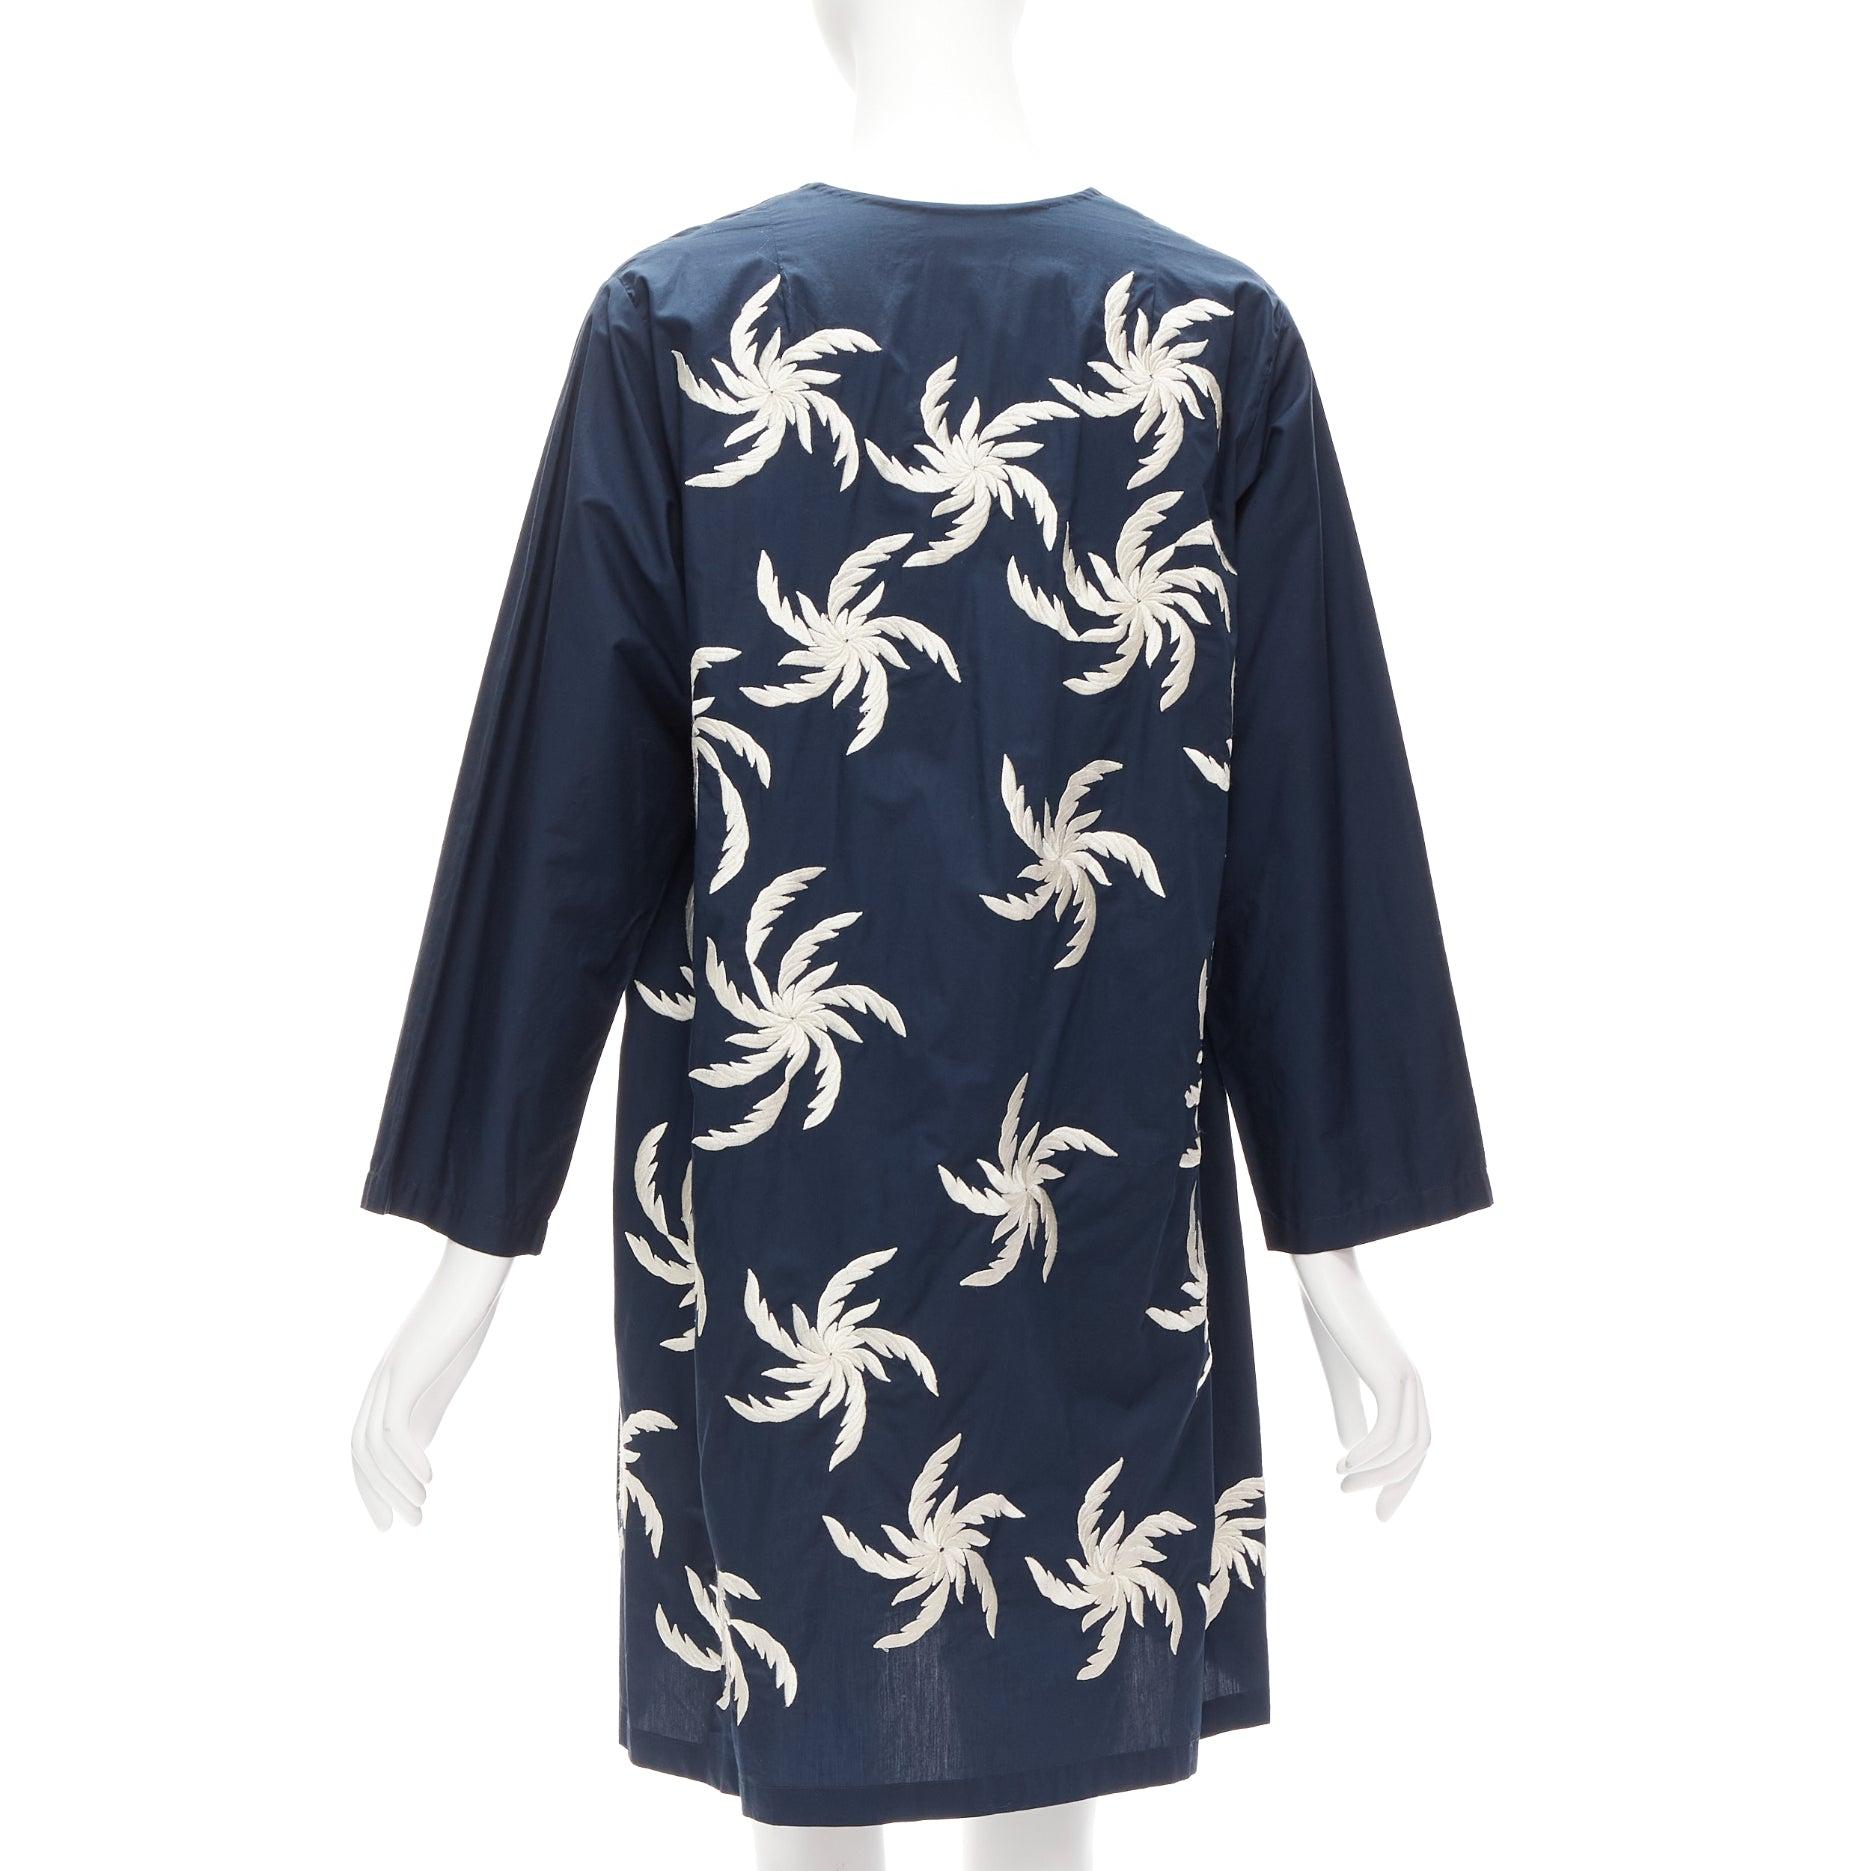 DRIES VAN NOTEN navy white 100% cotton floral embroidery boxy dress XS For Sale 1